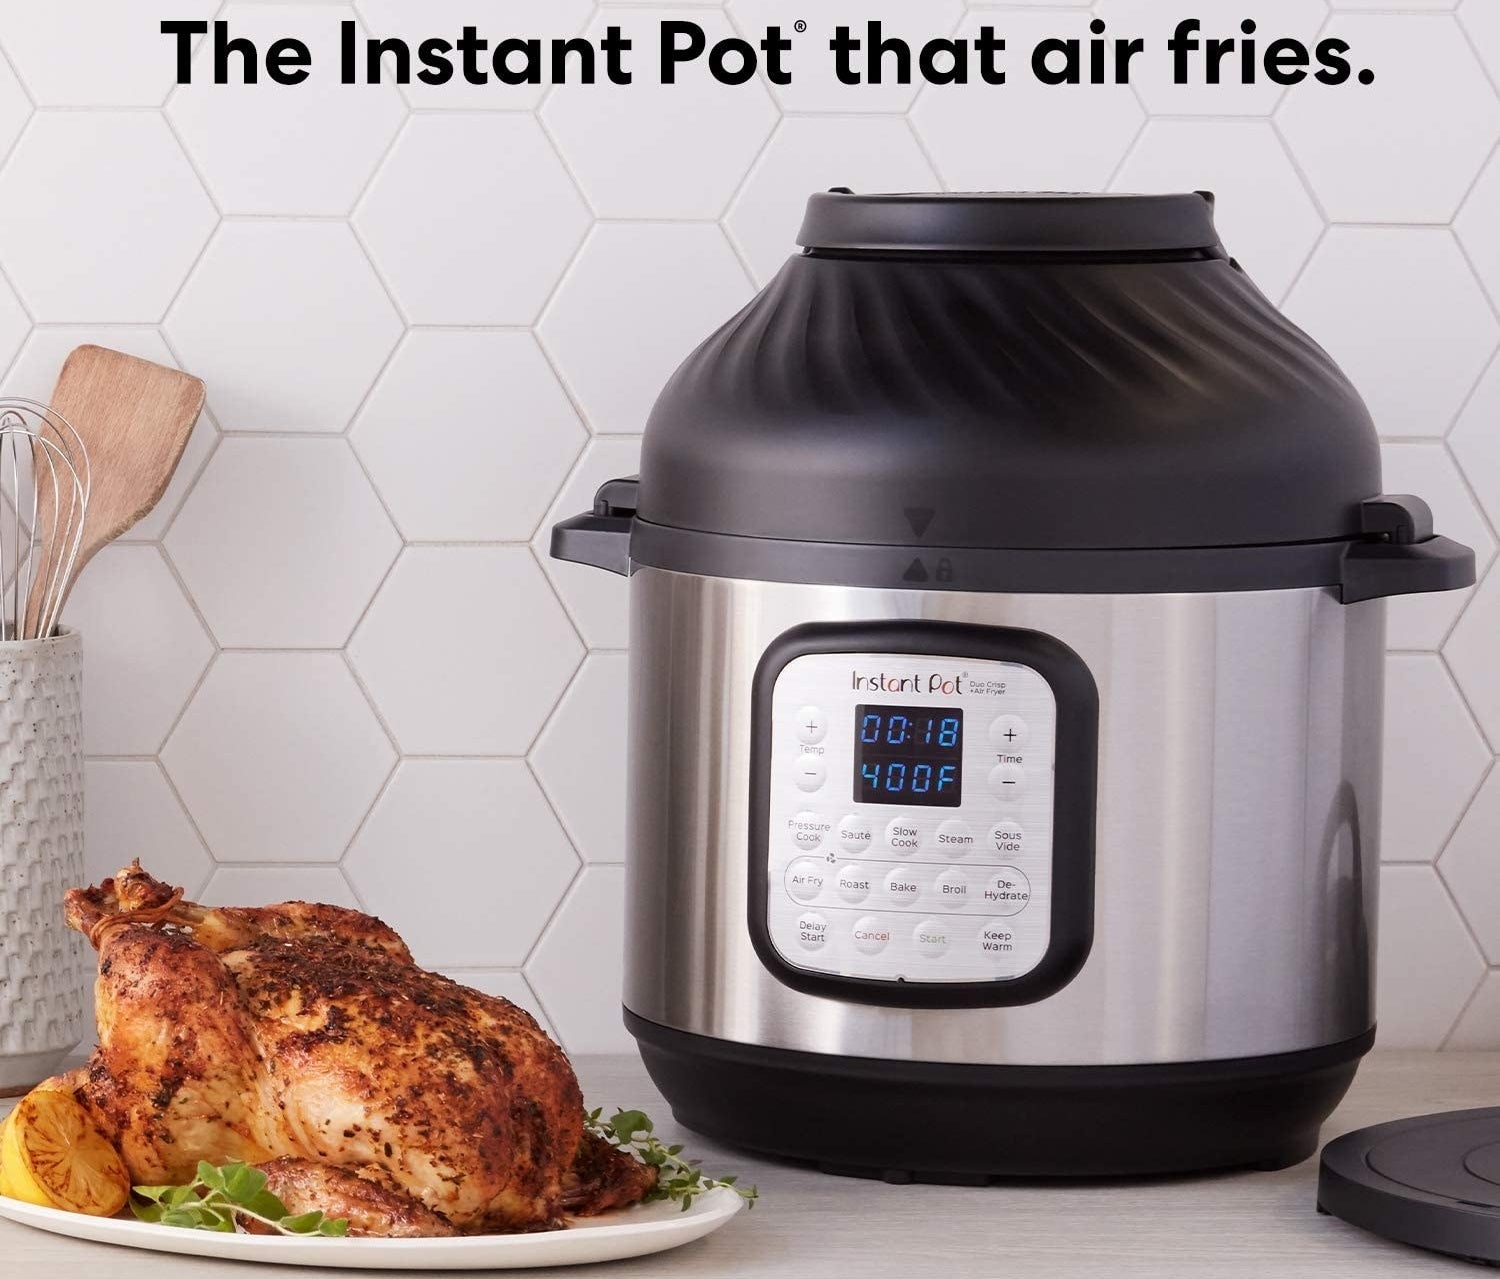 stainless steel instant pot with an air fryer attachment. fully roasted chicken next to it